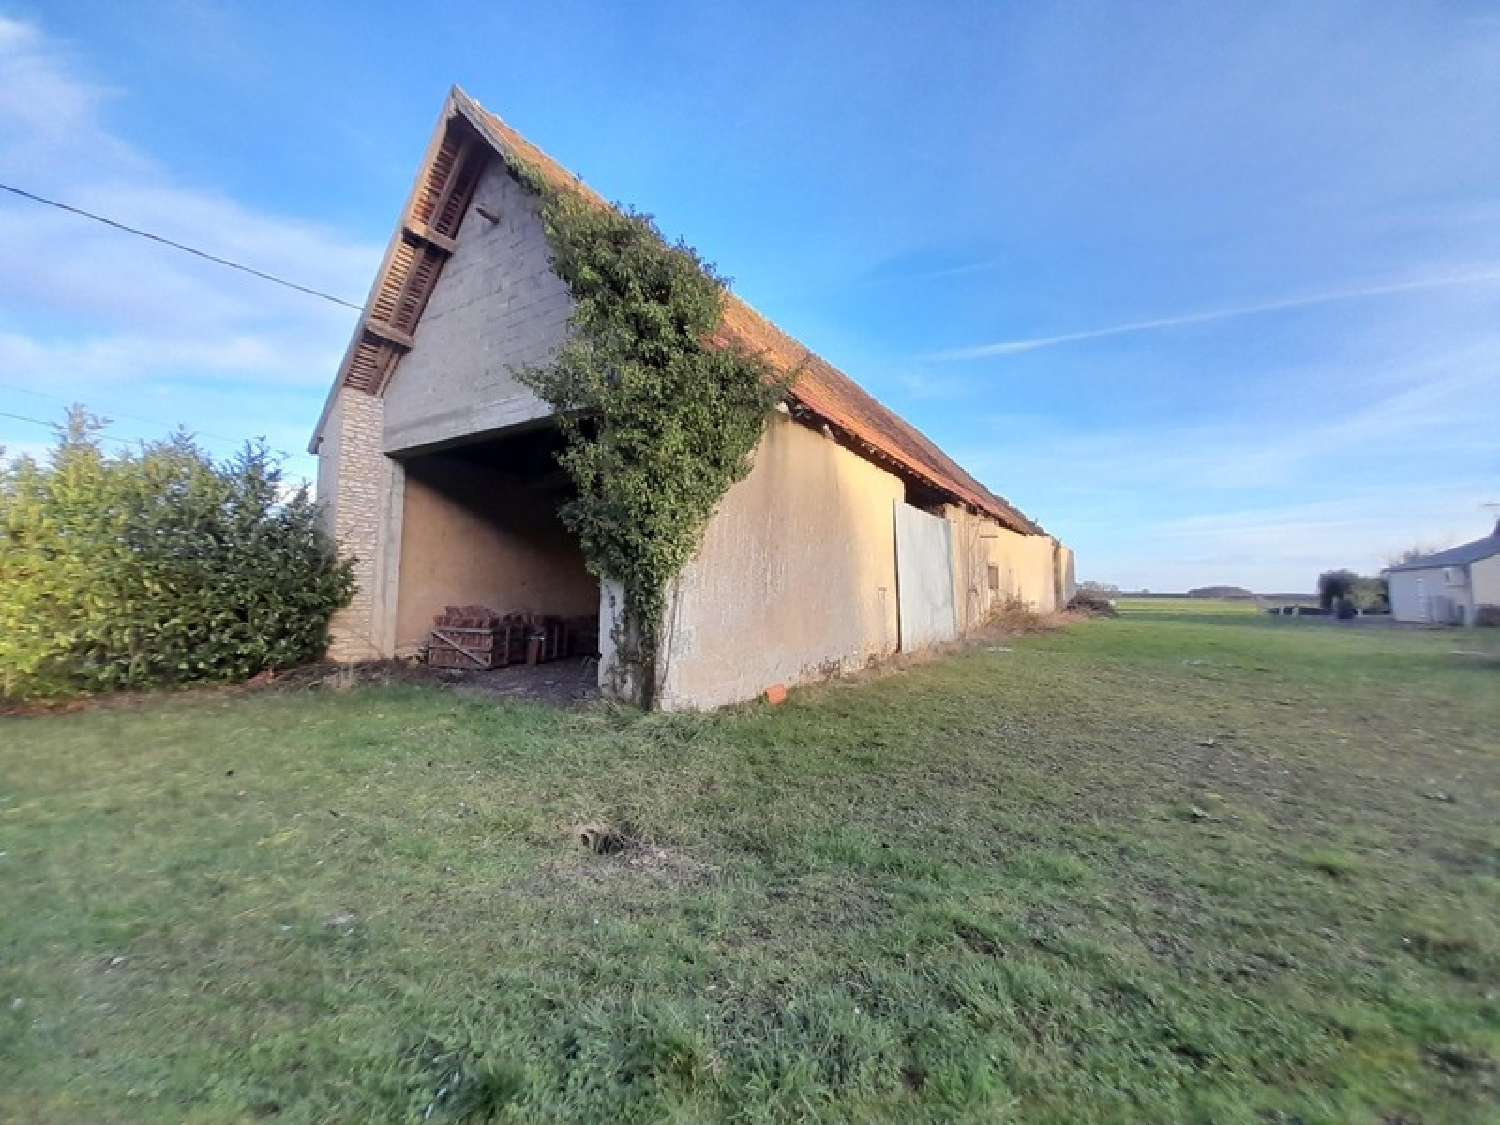  for sale barn Montierchaume Indre 3